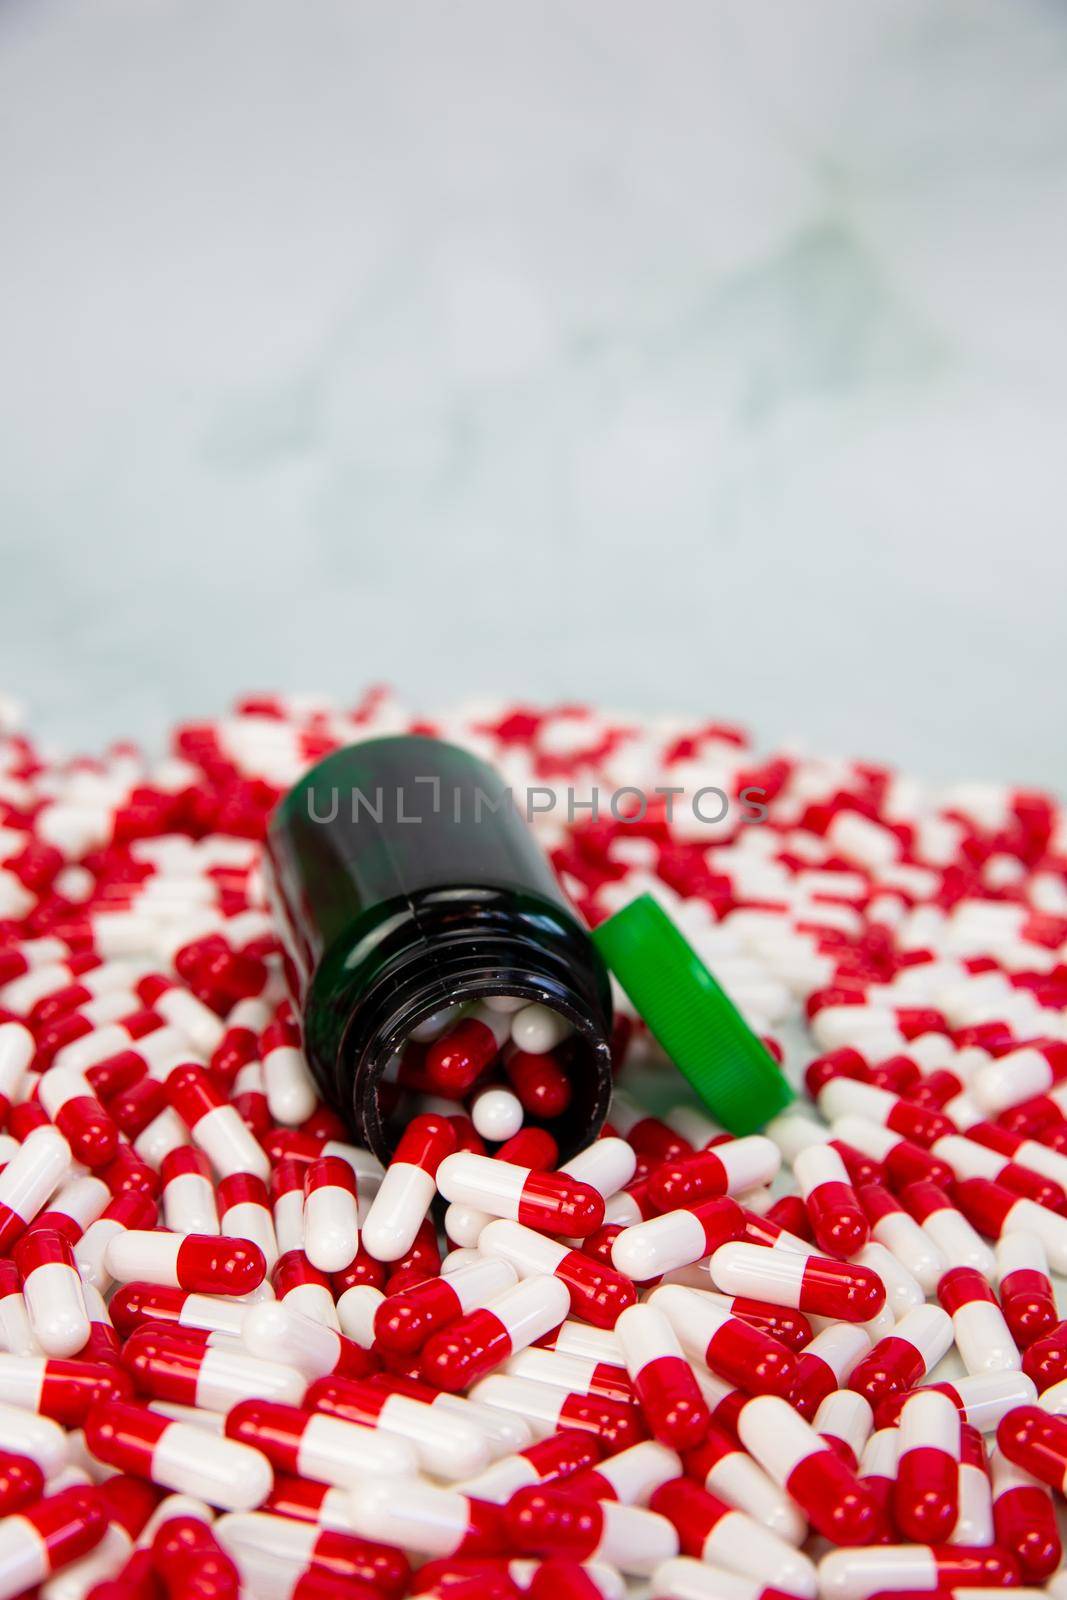 Bottle with red and white capsule on white background, Vitamin,drugs or pharmaceutical medication background, Health, medical and business concept copy space